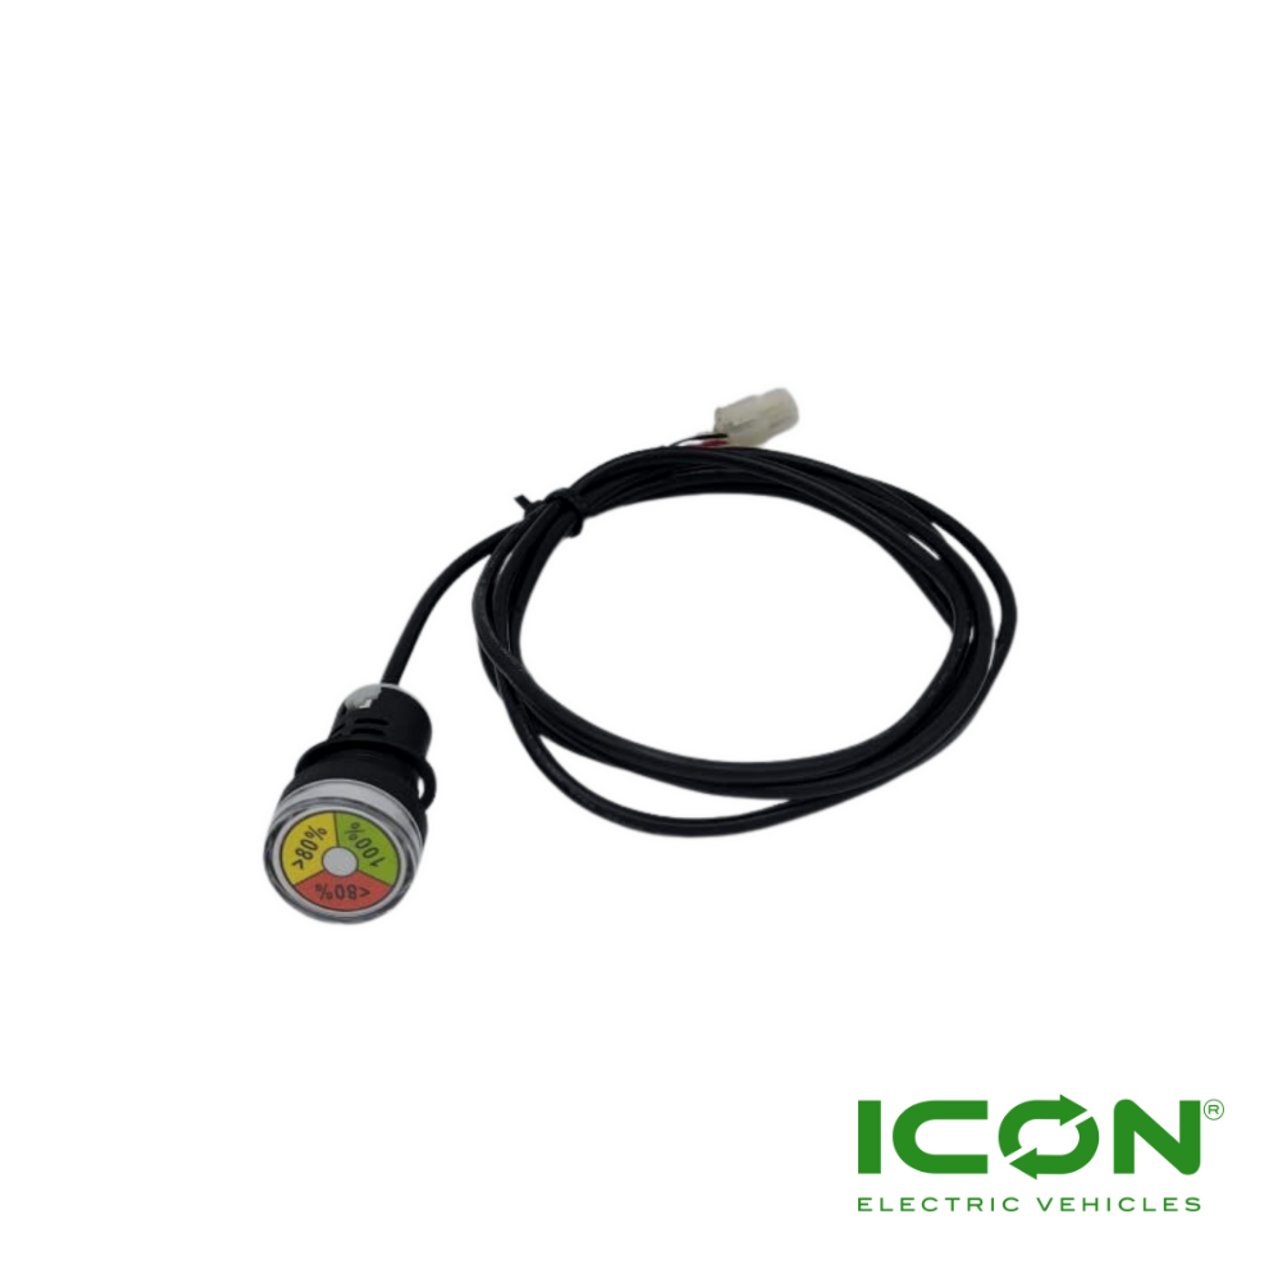 Charger Light Indicator for ICON Golf Carts, CHGR-705-IC, 3.03.001.900005, 3.202.01.010037